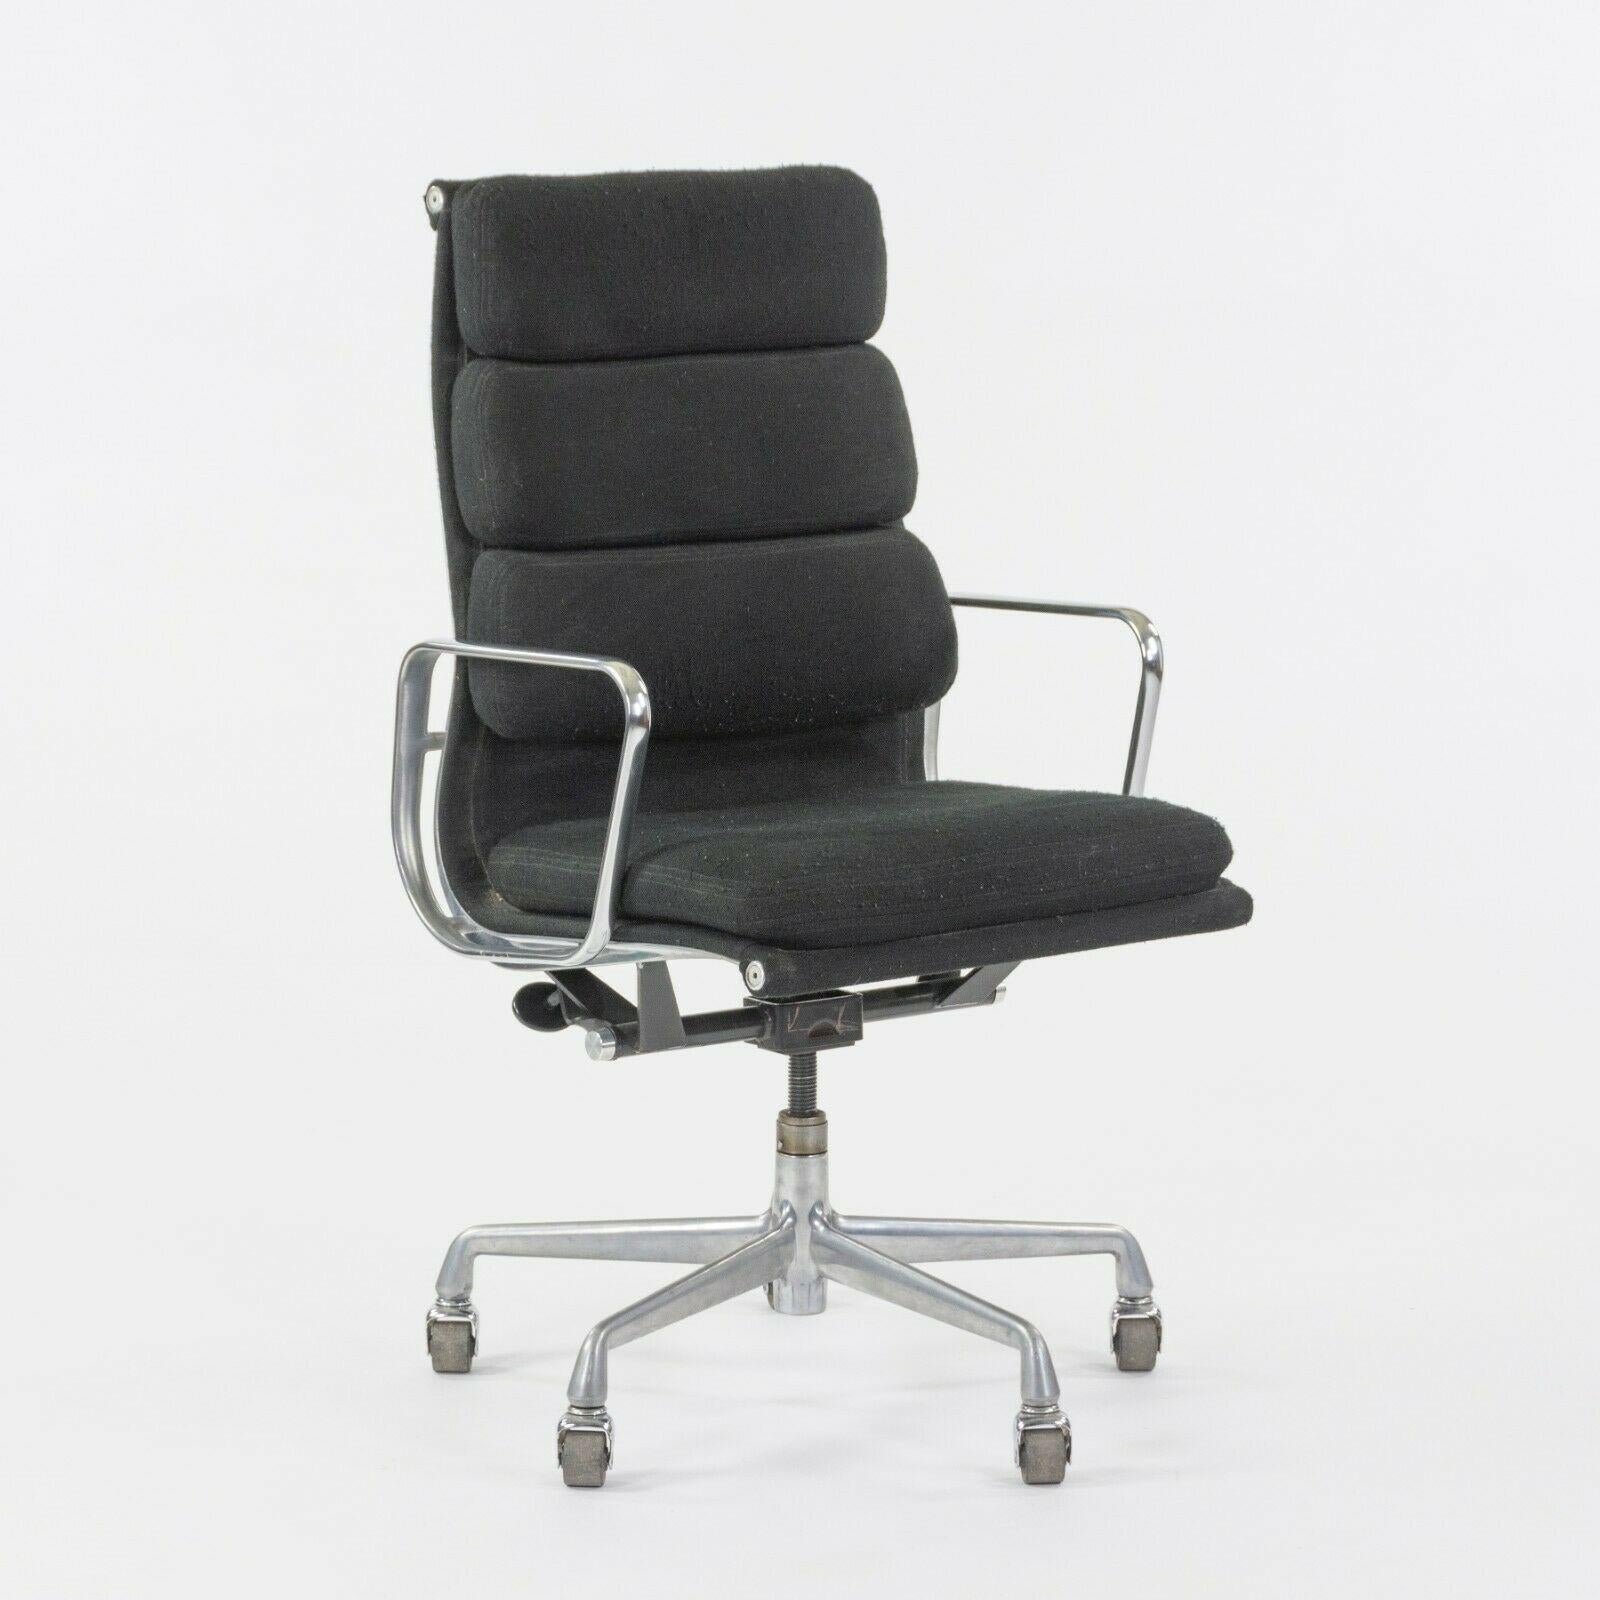 1985 Fabric Herman Miller Eames Aluminum Group Executive High Back Desk Chair For Sale 1